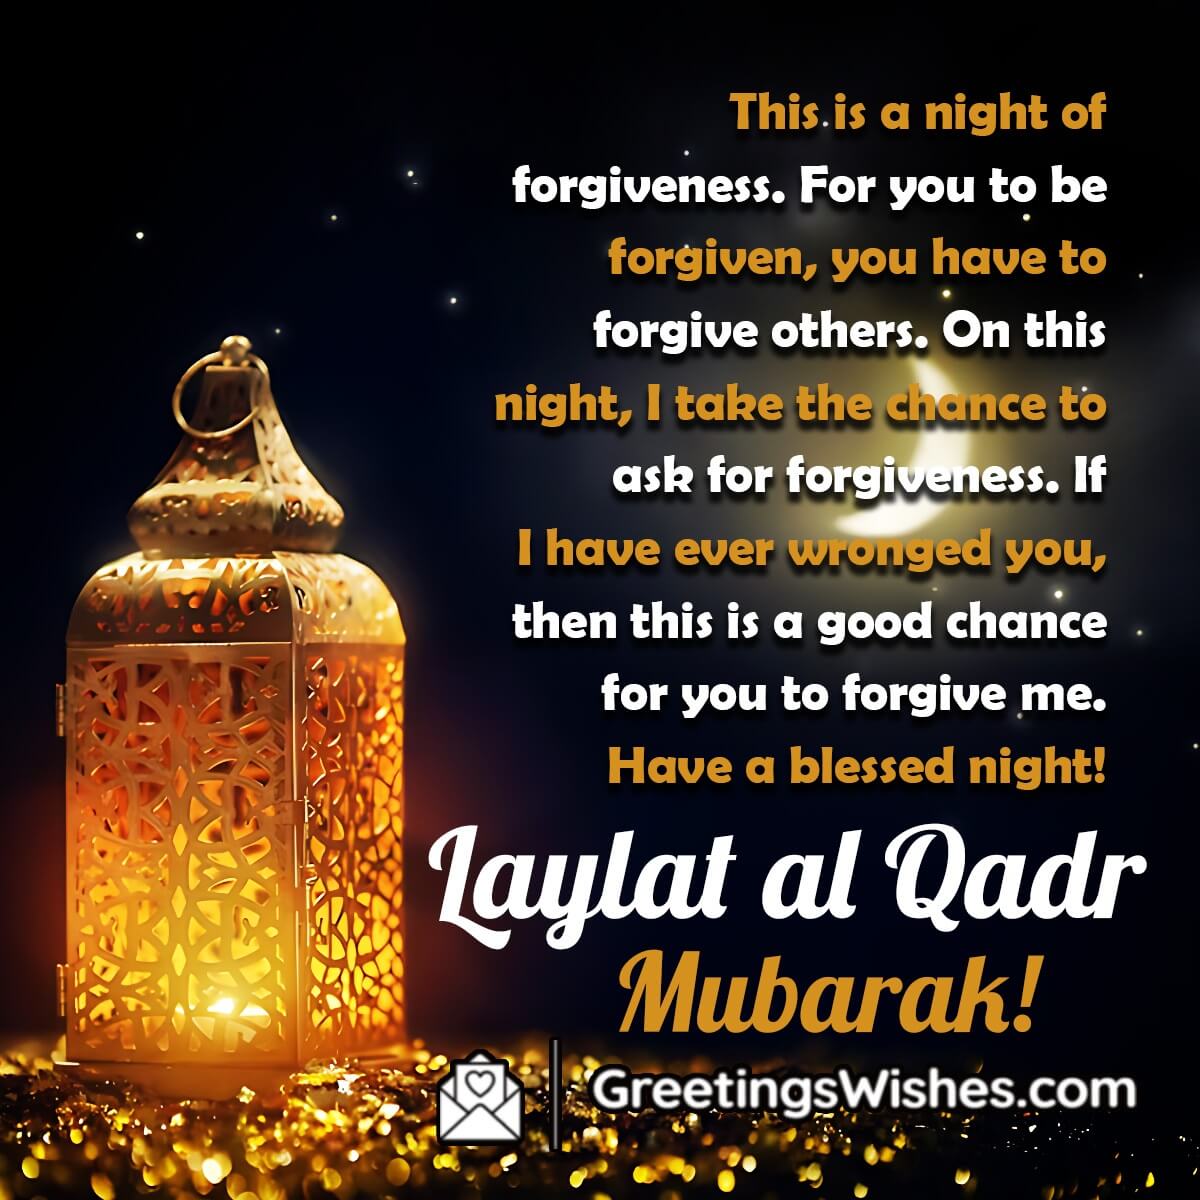 Laylatul Qadr Wishes Messages ( 17 April ) - Greetings Wishes